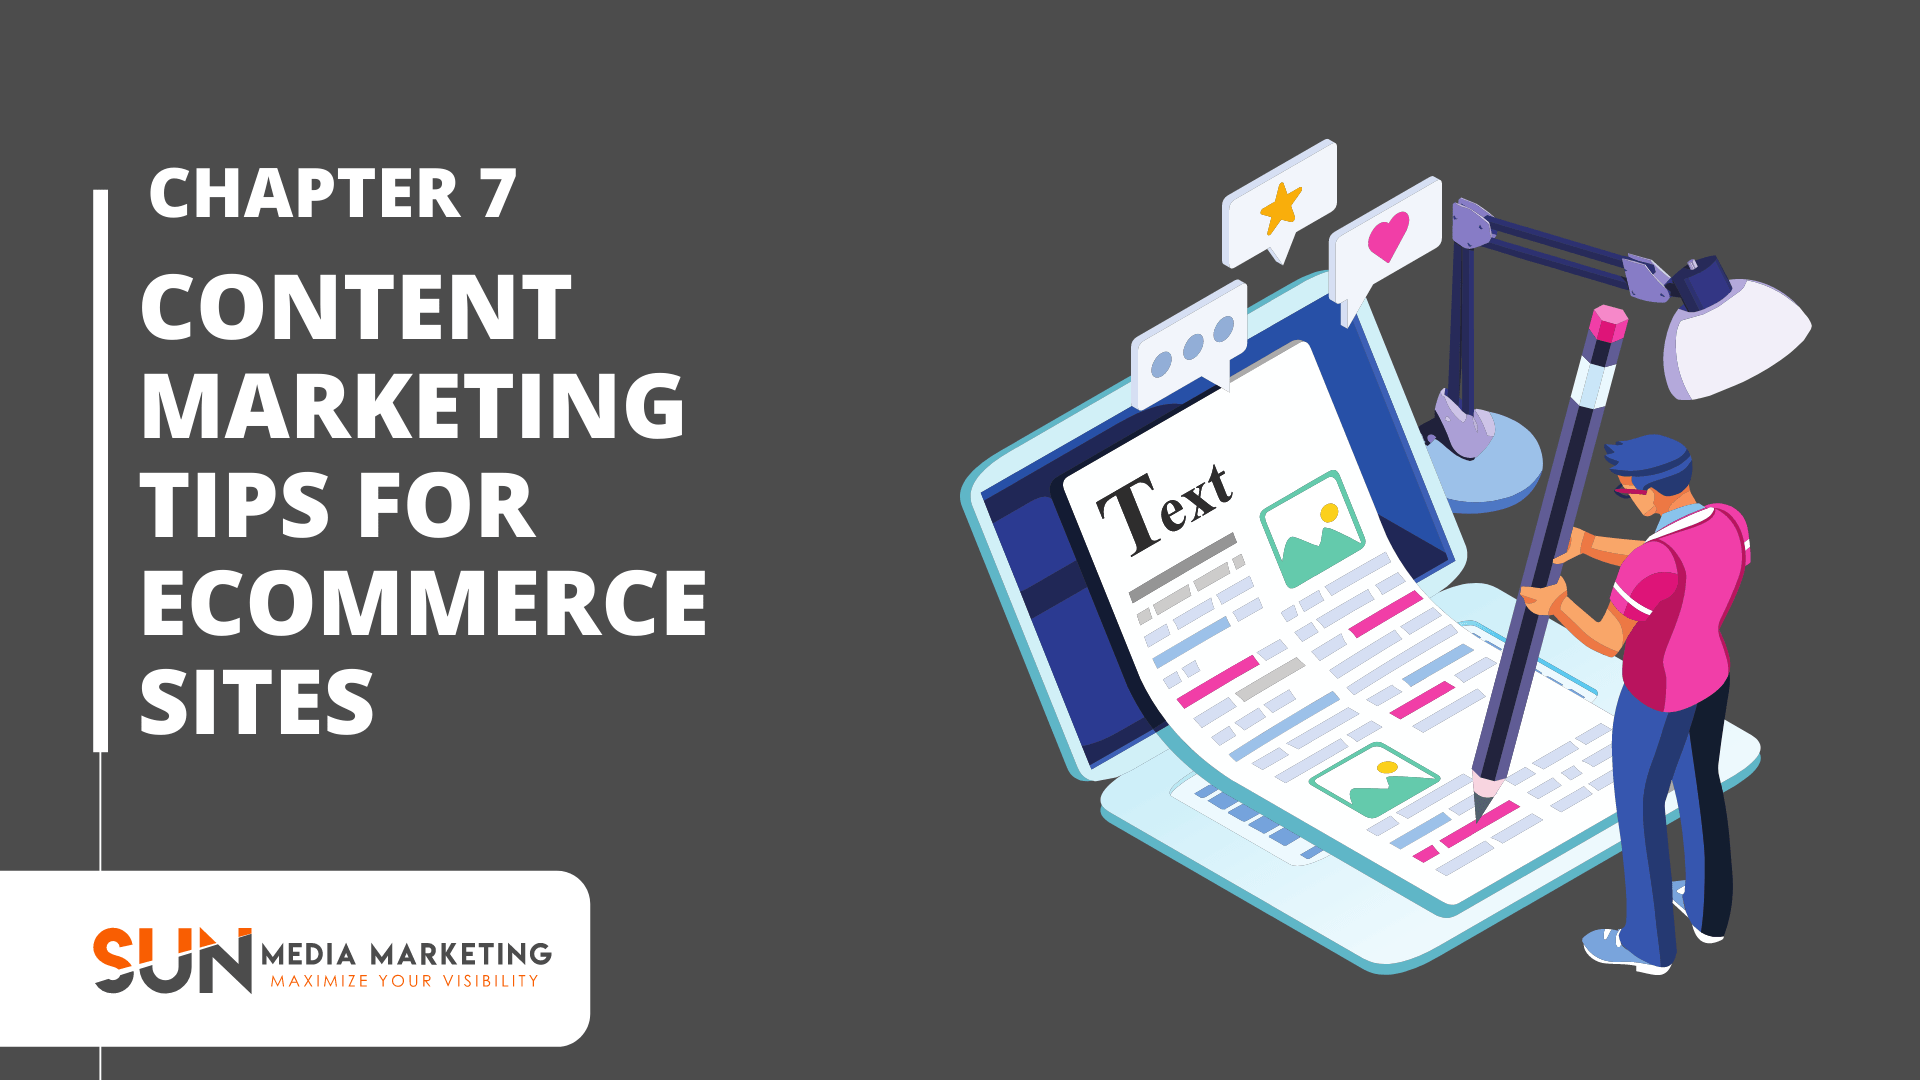 Content Marketing Tips for eCommerce Sites